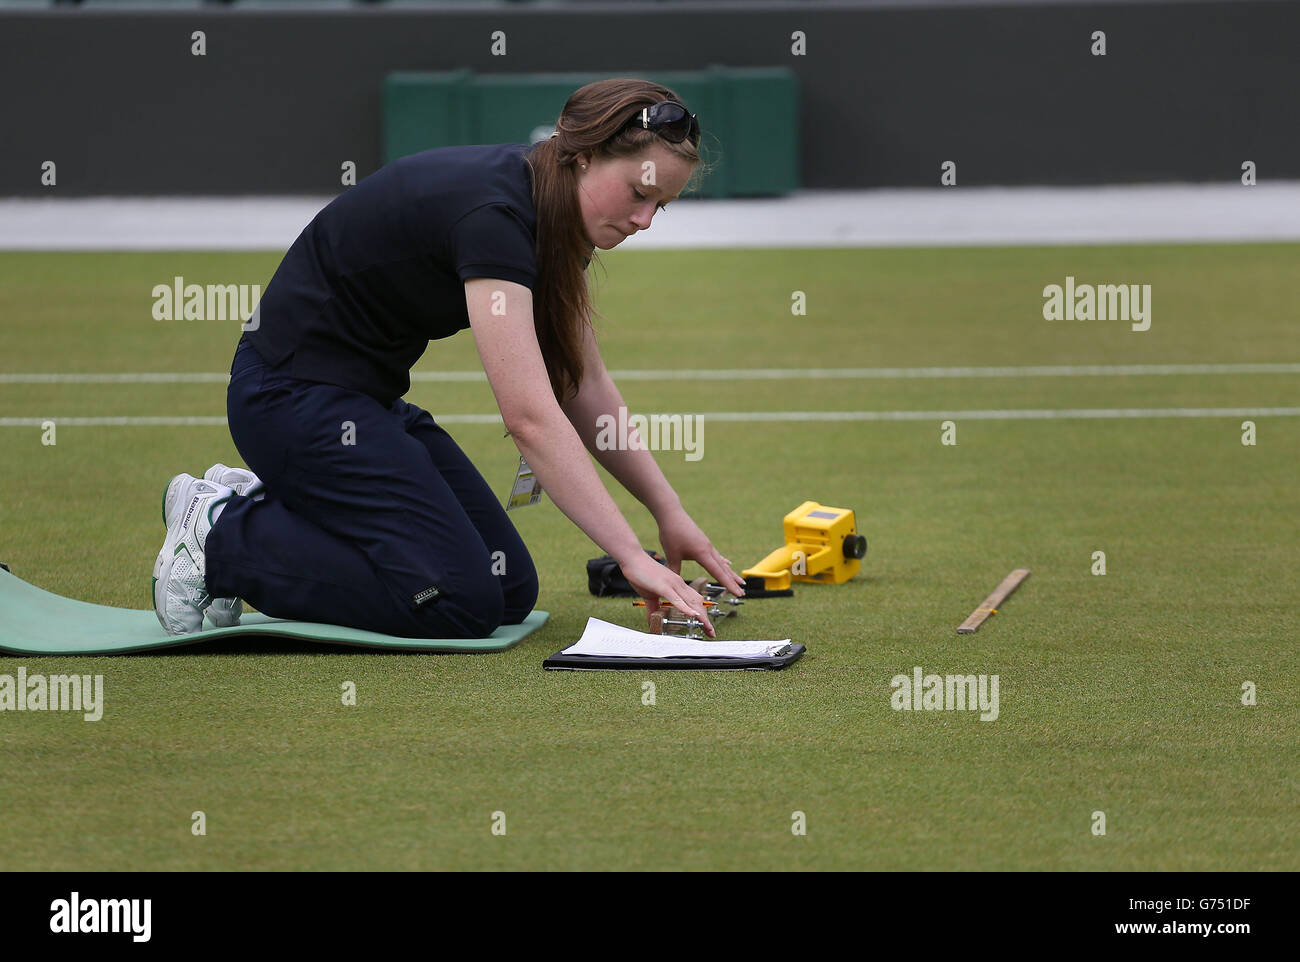 Laura Budimir, a research officer for the Sports Turf Research Institute checks live grass cover on Court 1 on day six of the Wimbledon Championships at the All England Lawn Tennis and Croquet Club, Wimbledon. Stock Photo